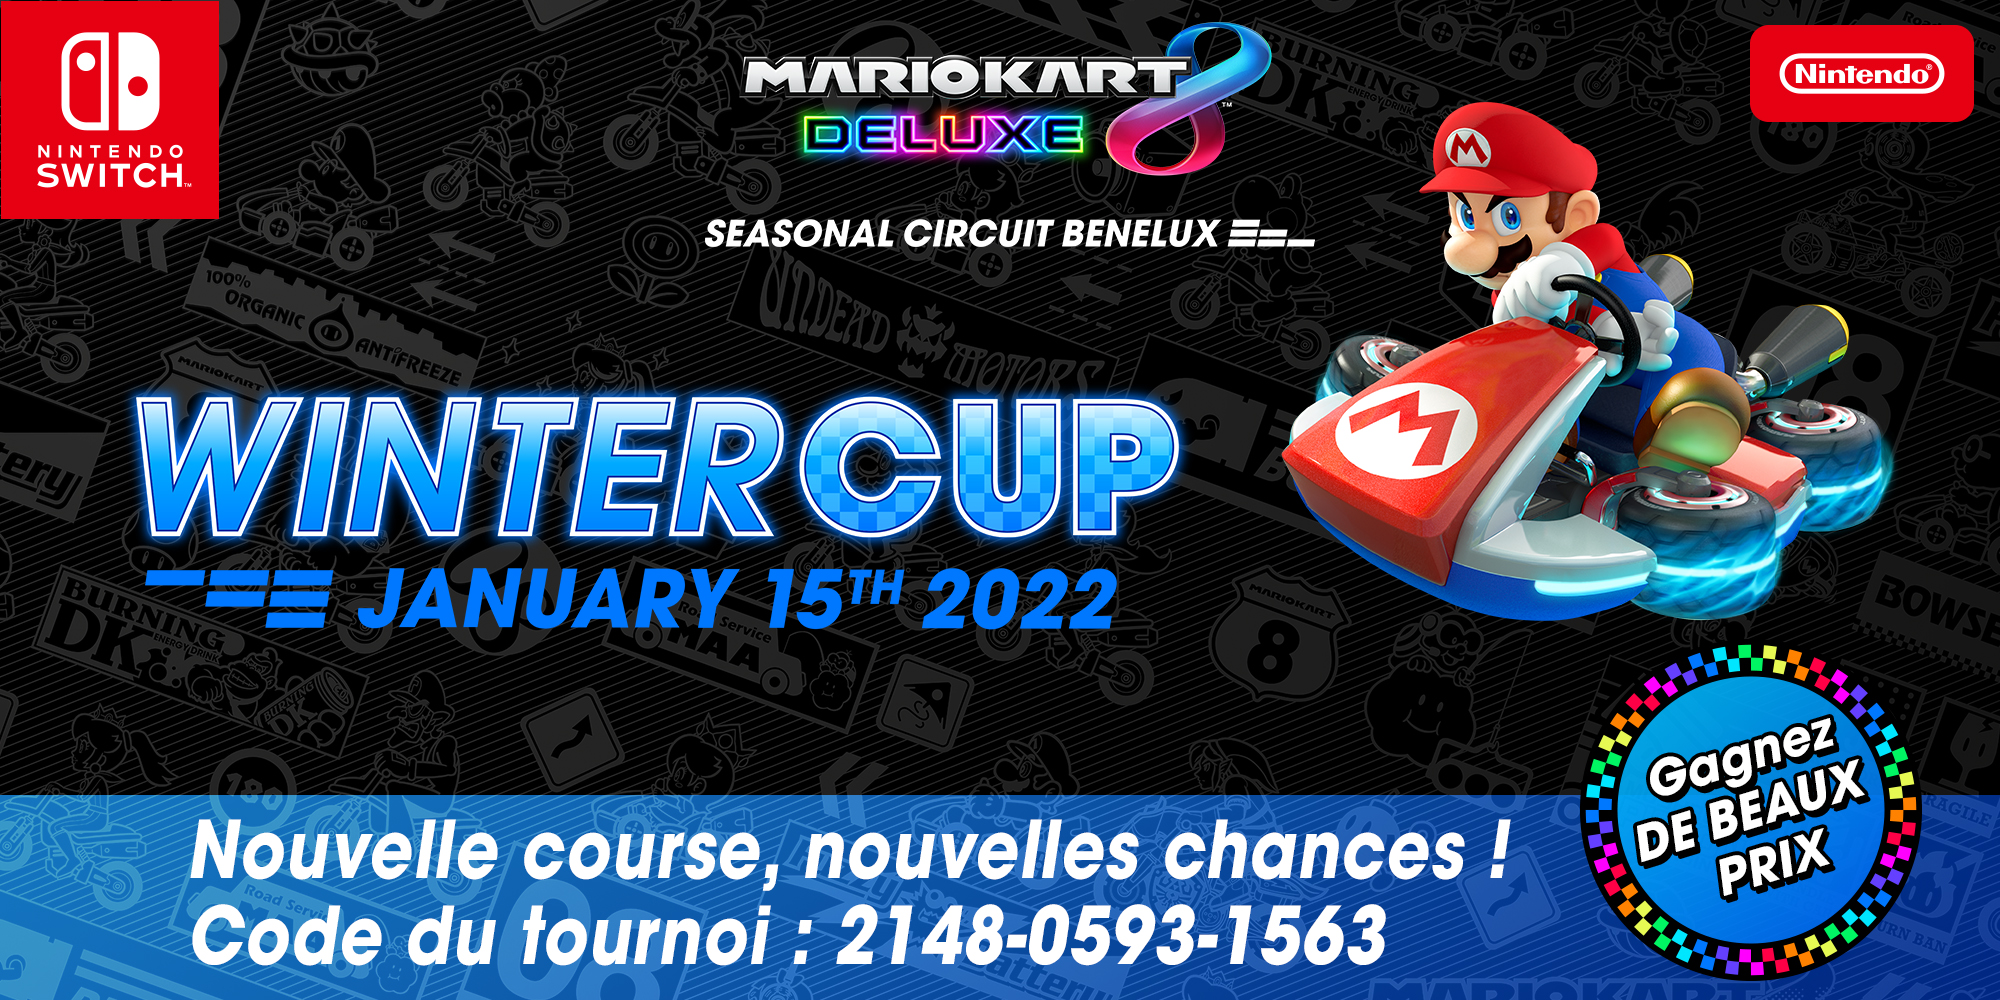 Winter Cup 2022